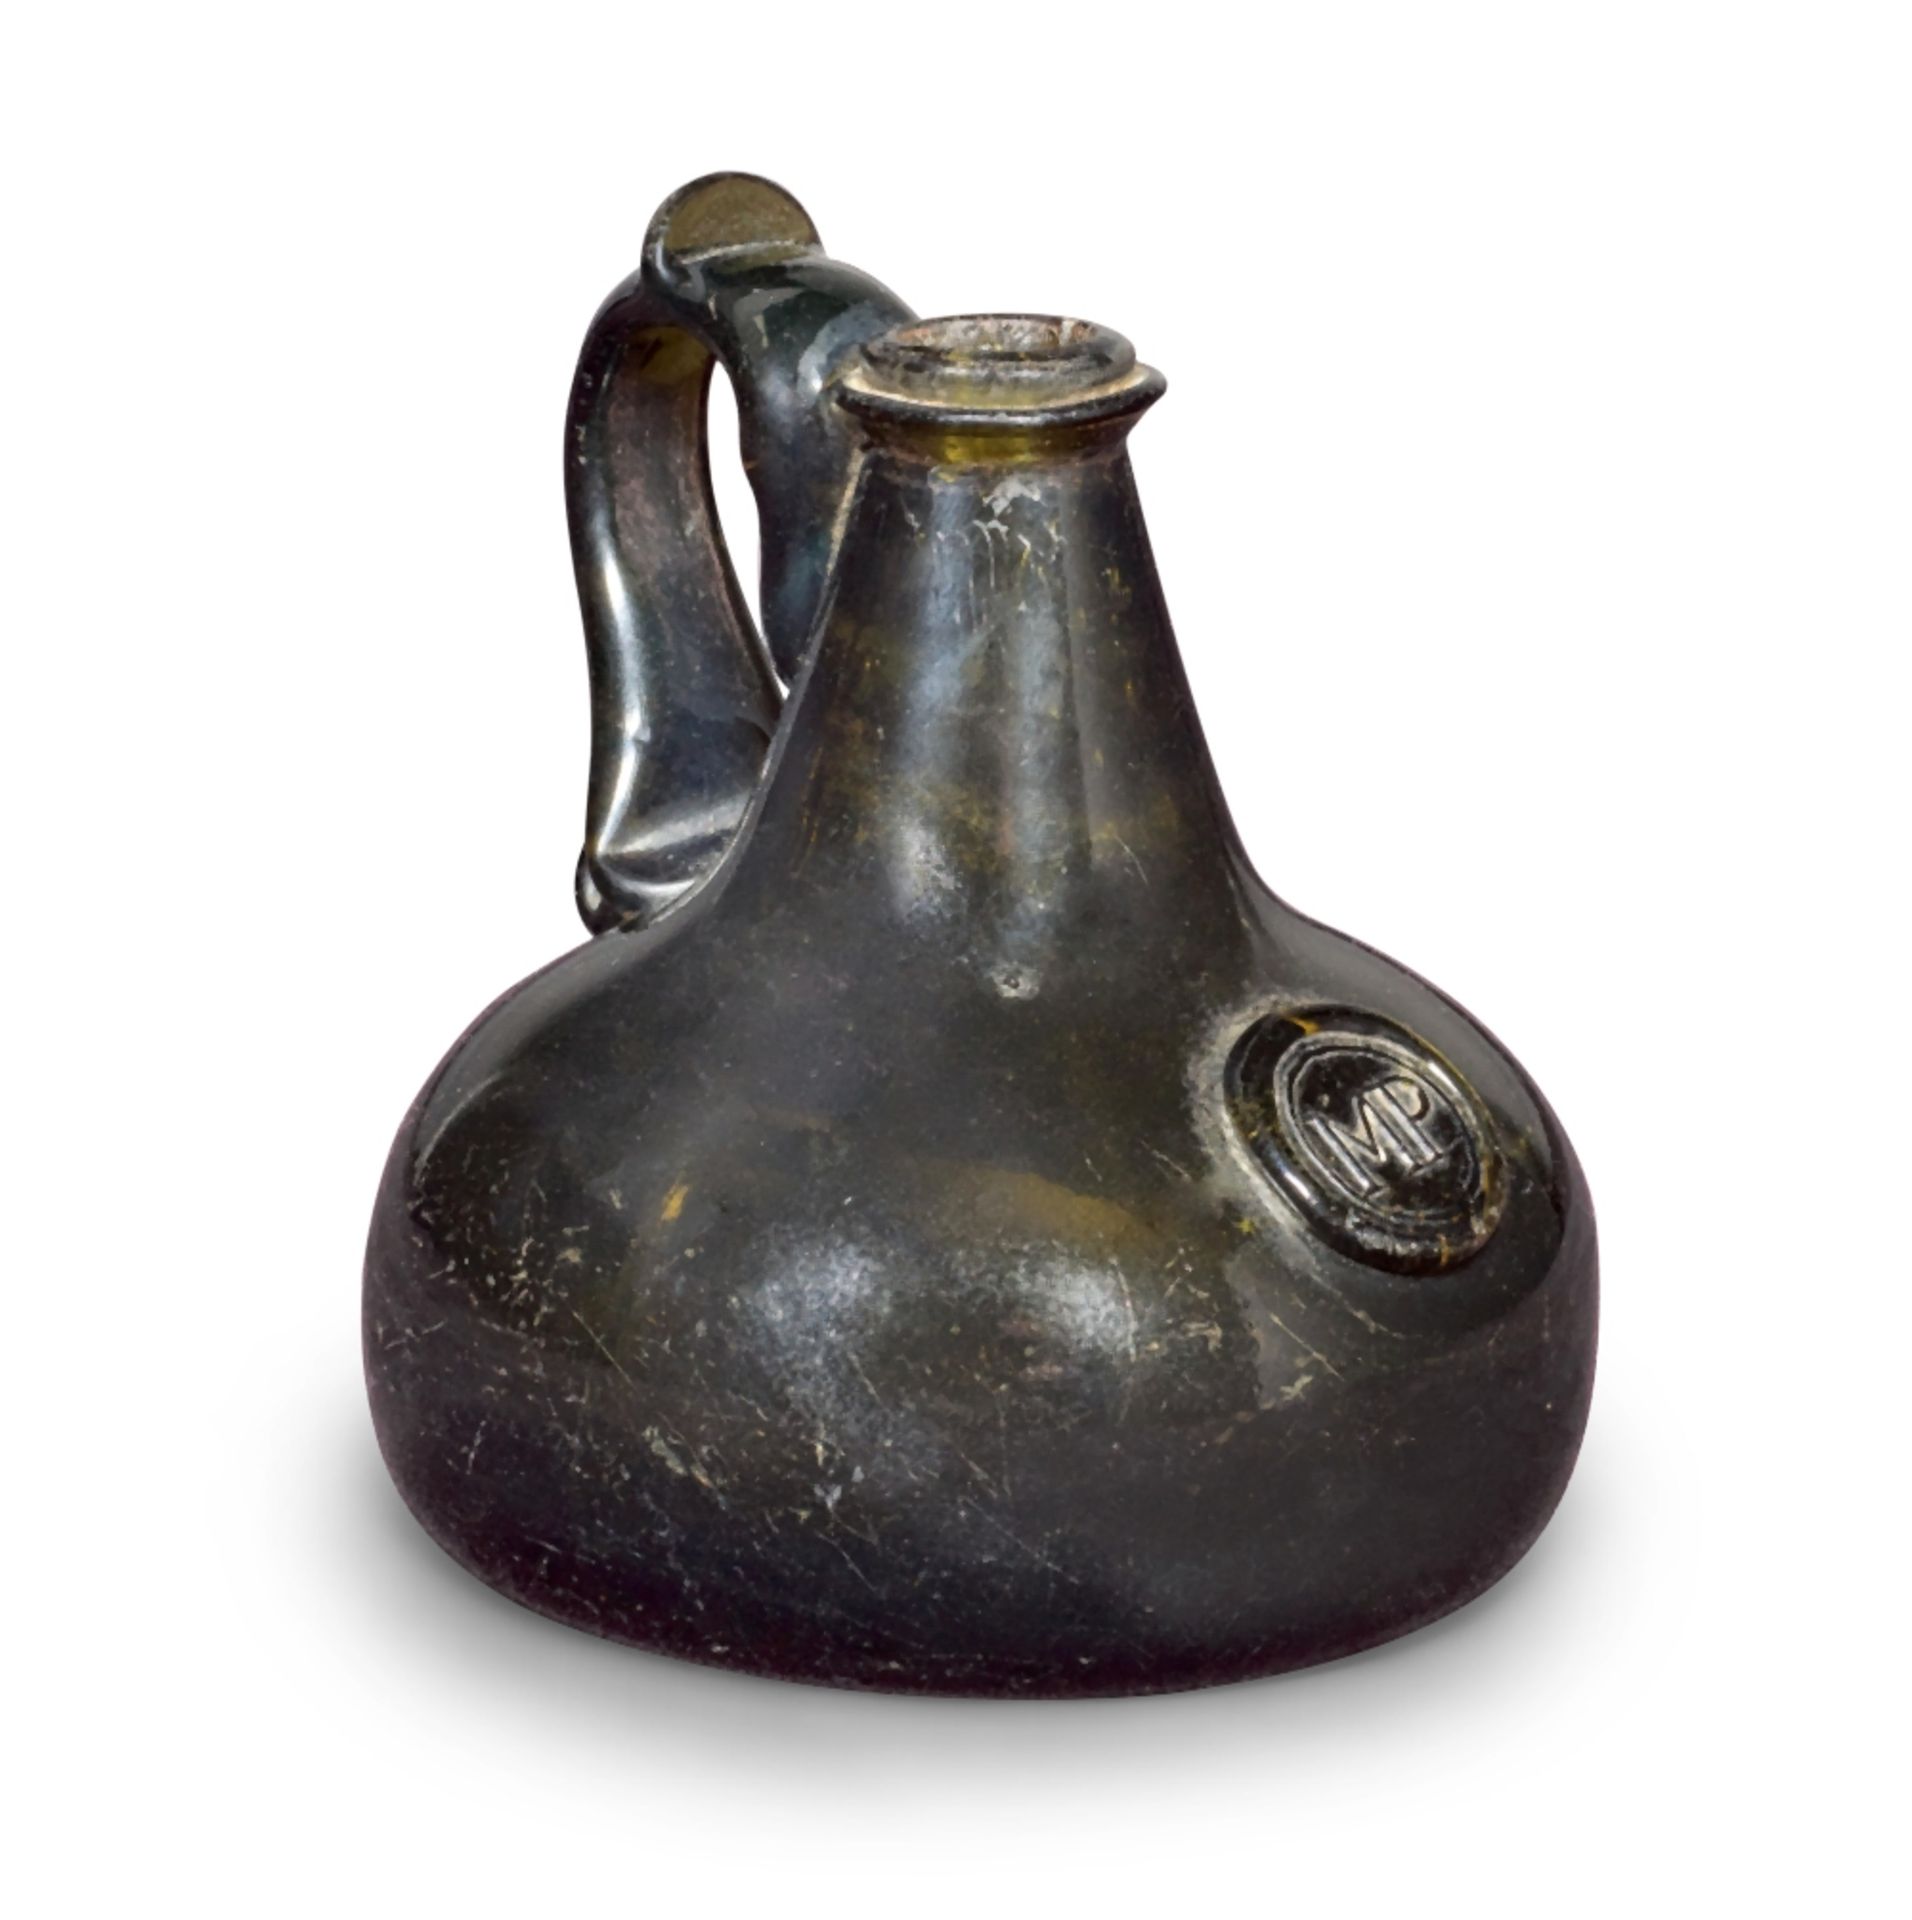 A very rare sealed half size 'Onion' serving bottle, circa 1690-95